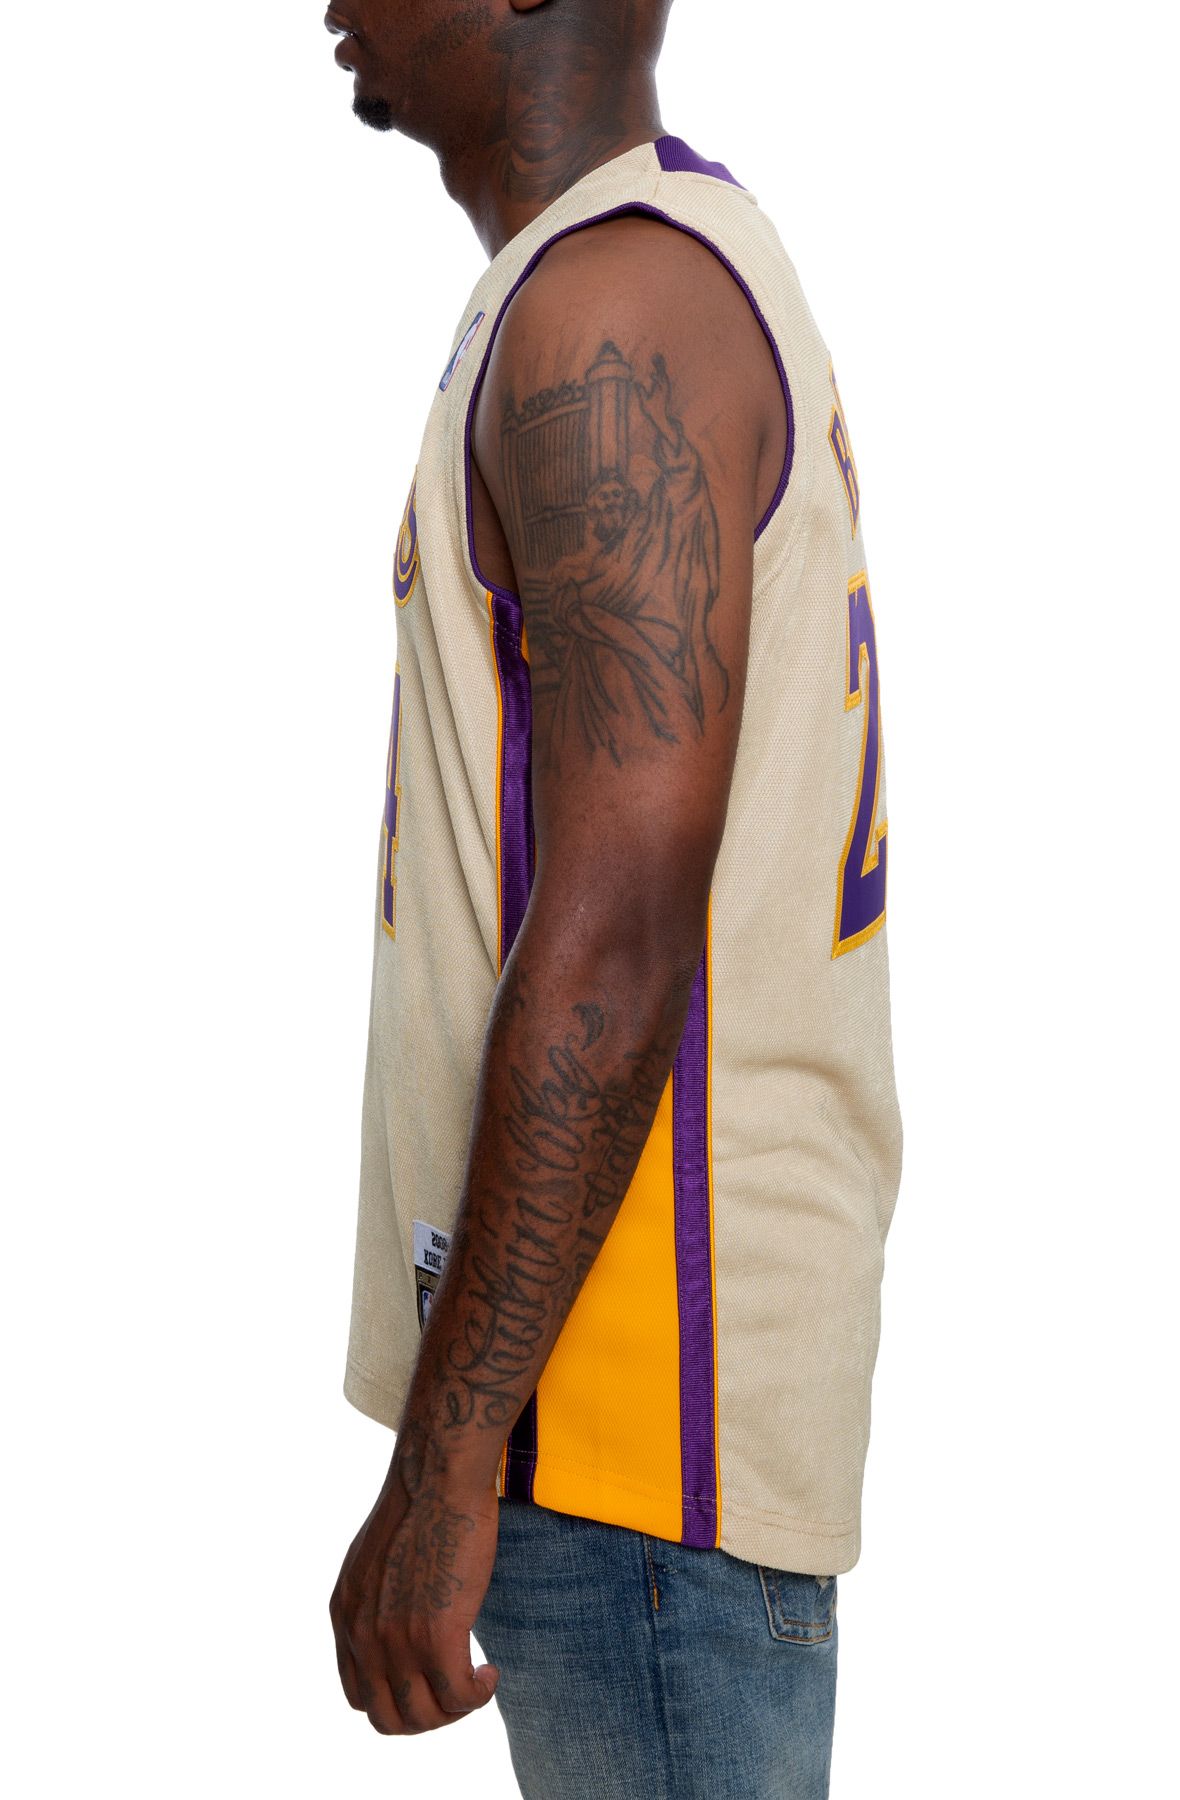 Aape x Mitchell & Ness Los Angeles Lakers BP Jersey Gold Men's